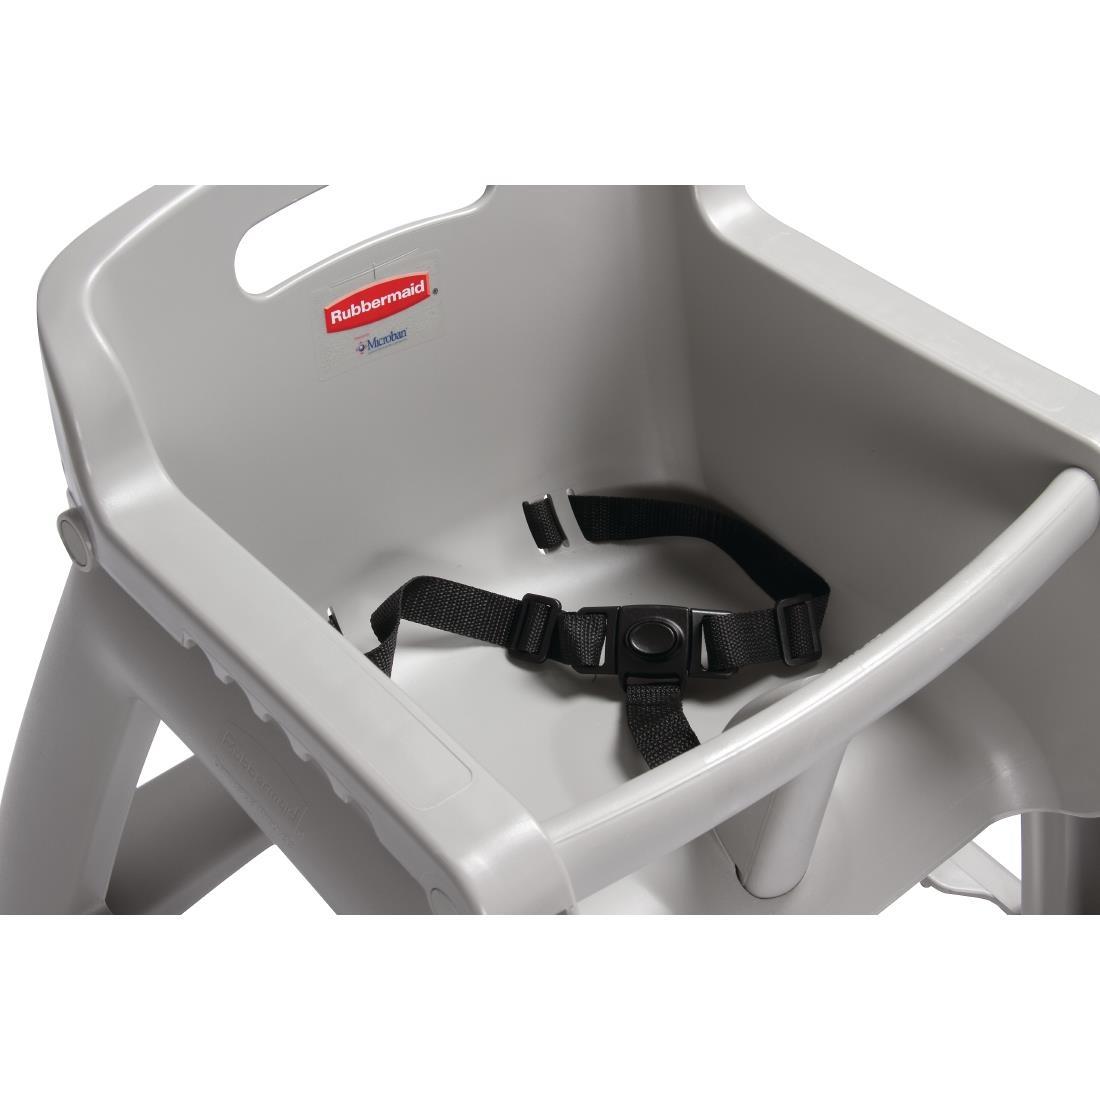 Rubbermaid Sturdy Stacking High Chair Platinum - M959  - 4